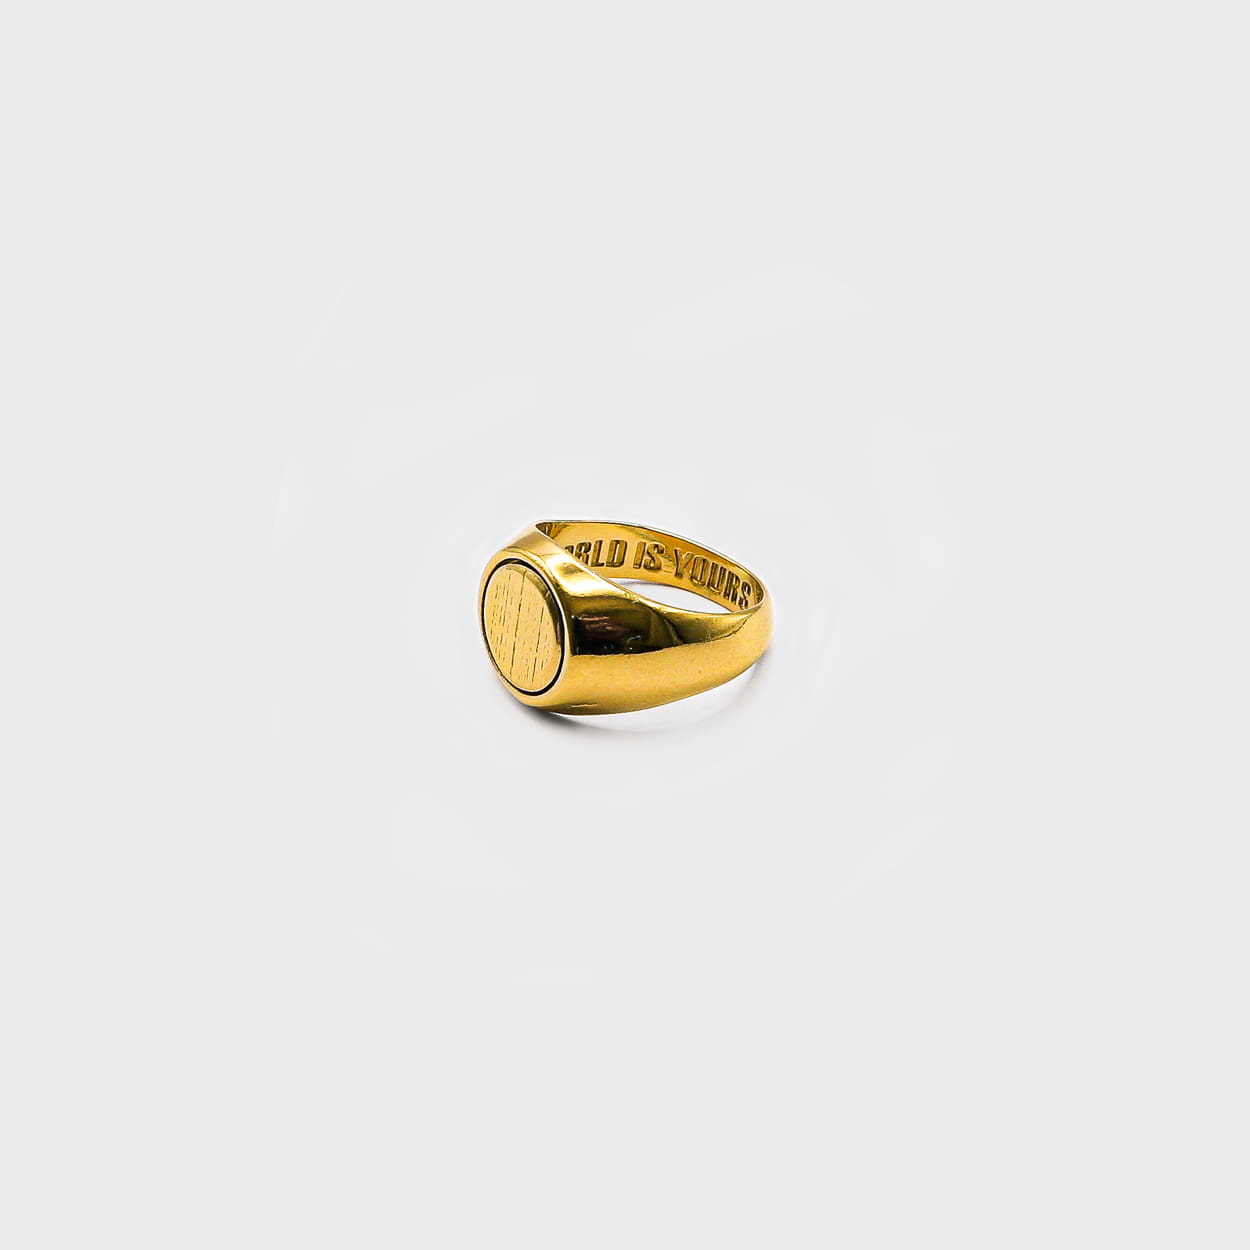 Atelier Domingo's Original gold ring is made in Spain. This unisex ring is for both men and women. This jewelry is made of a high-quality 24 karat gold plating. A timeless ring for both men and women.